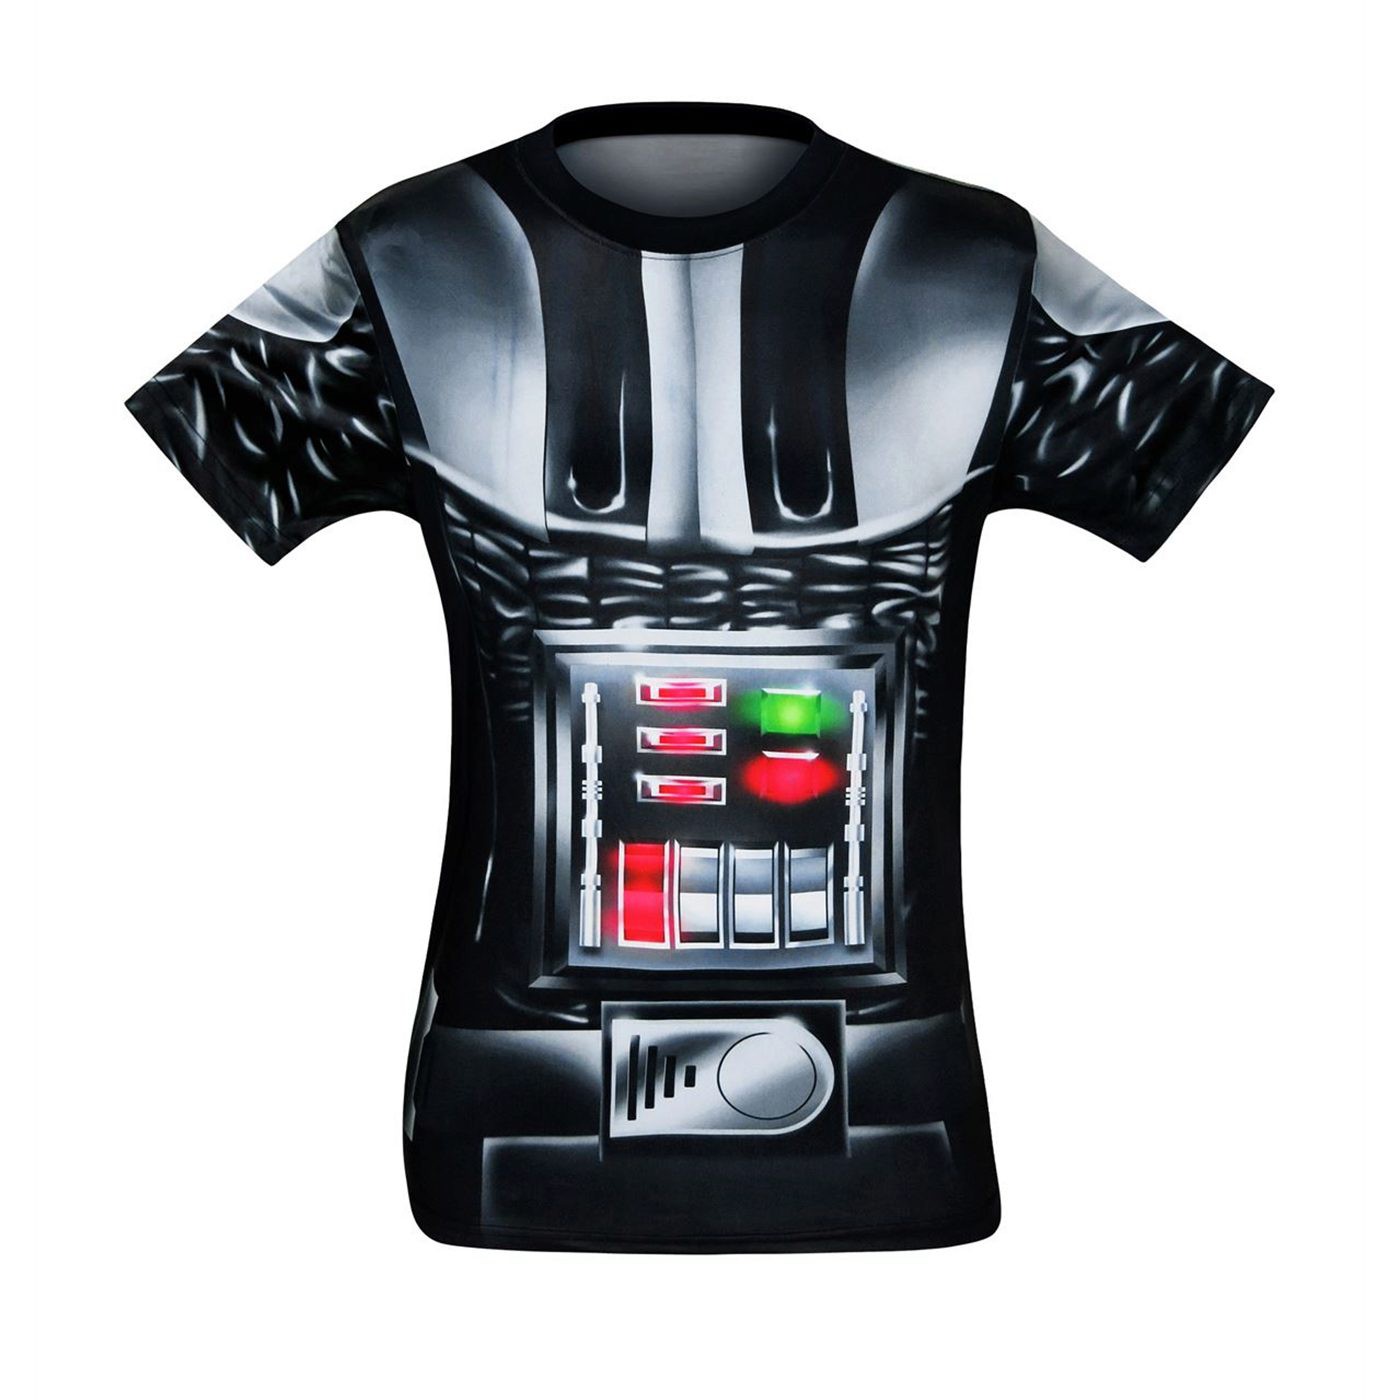 Darth Vader Sublimated Costume Fitness T-Shirt